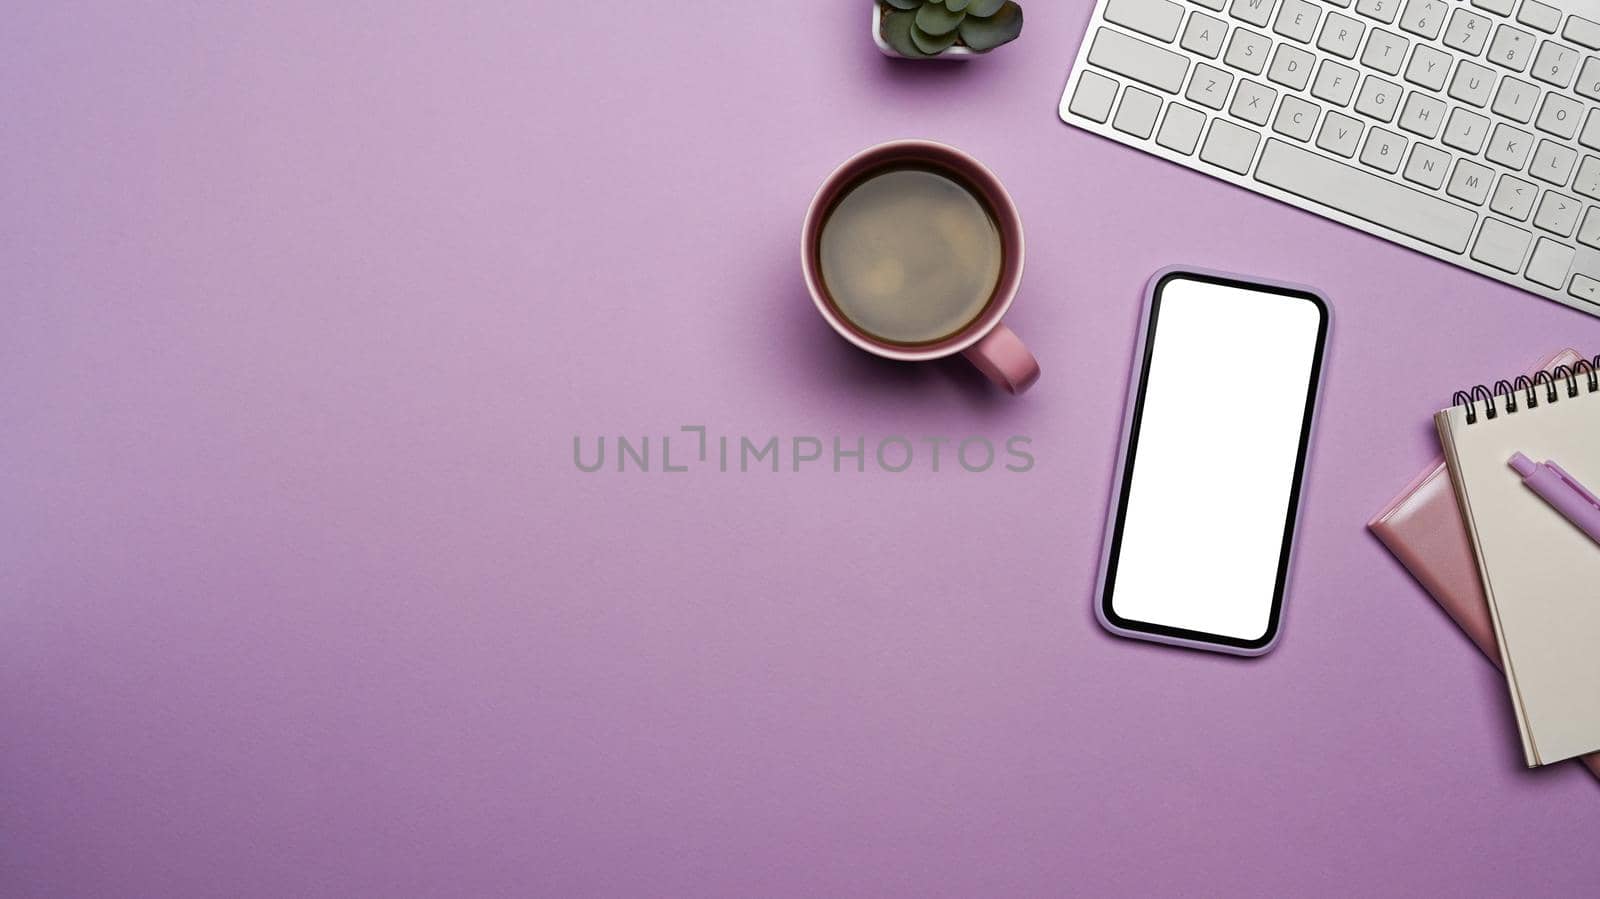 Mobile phone with blank screen, coffee cup and supplies on purple background.